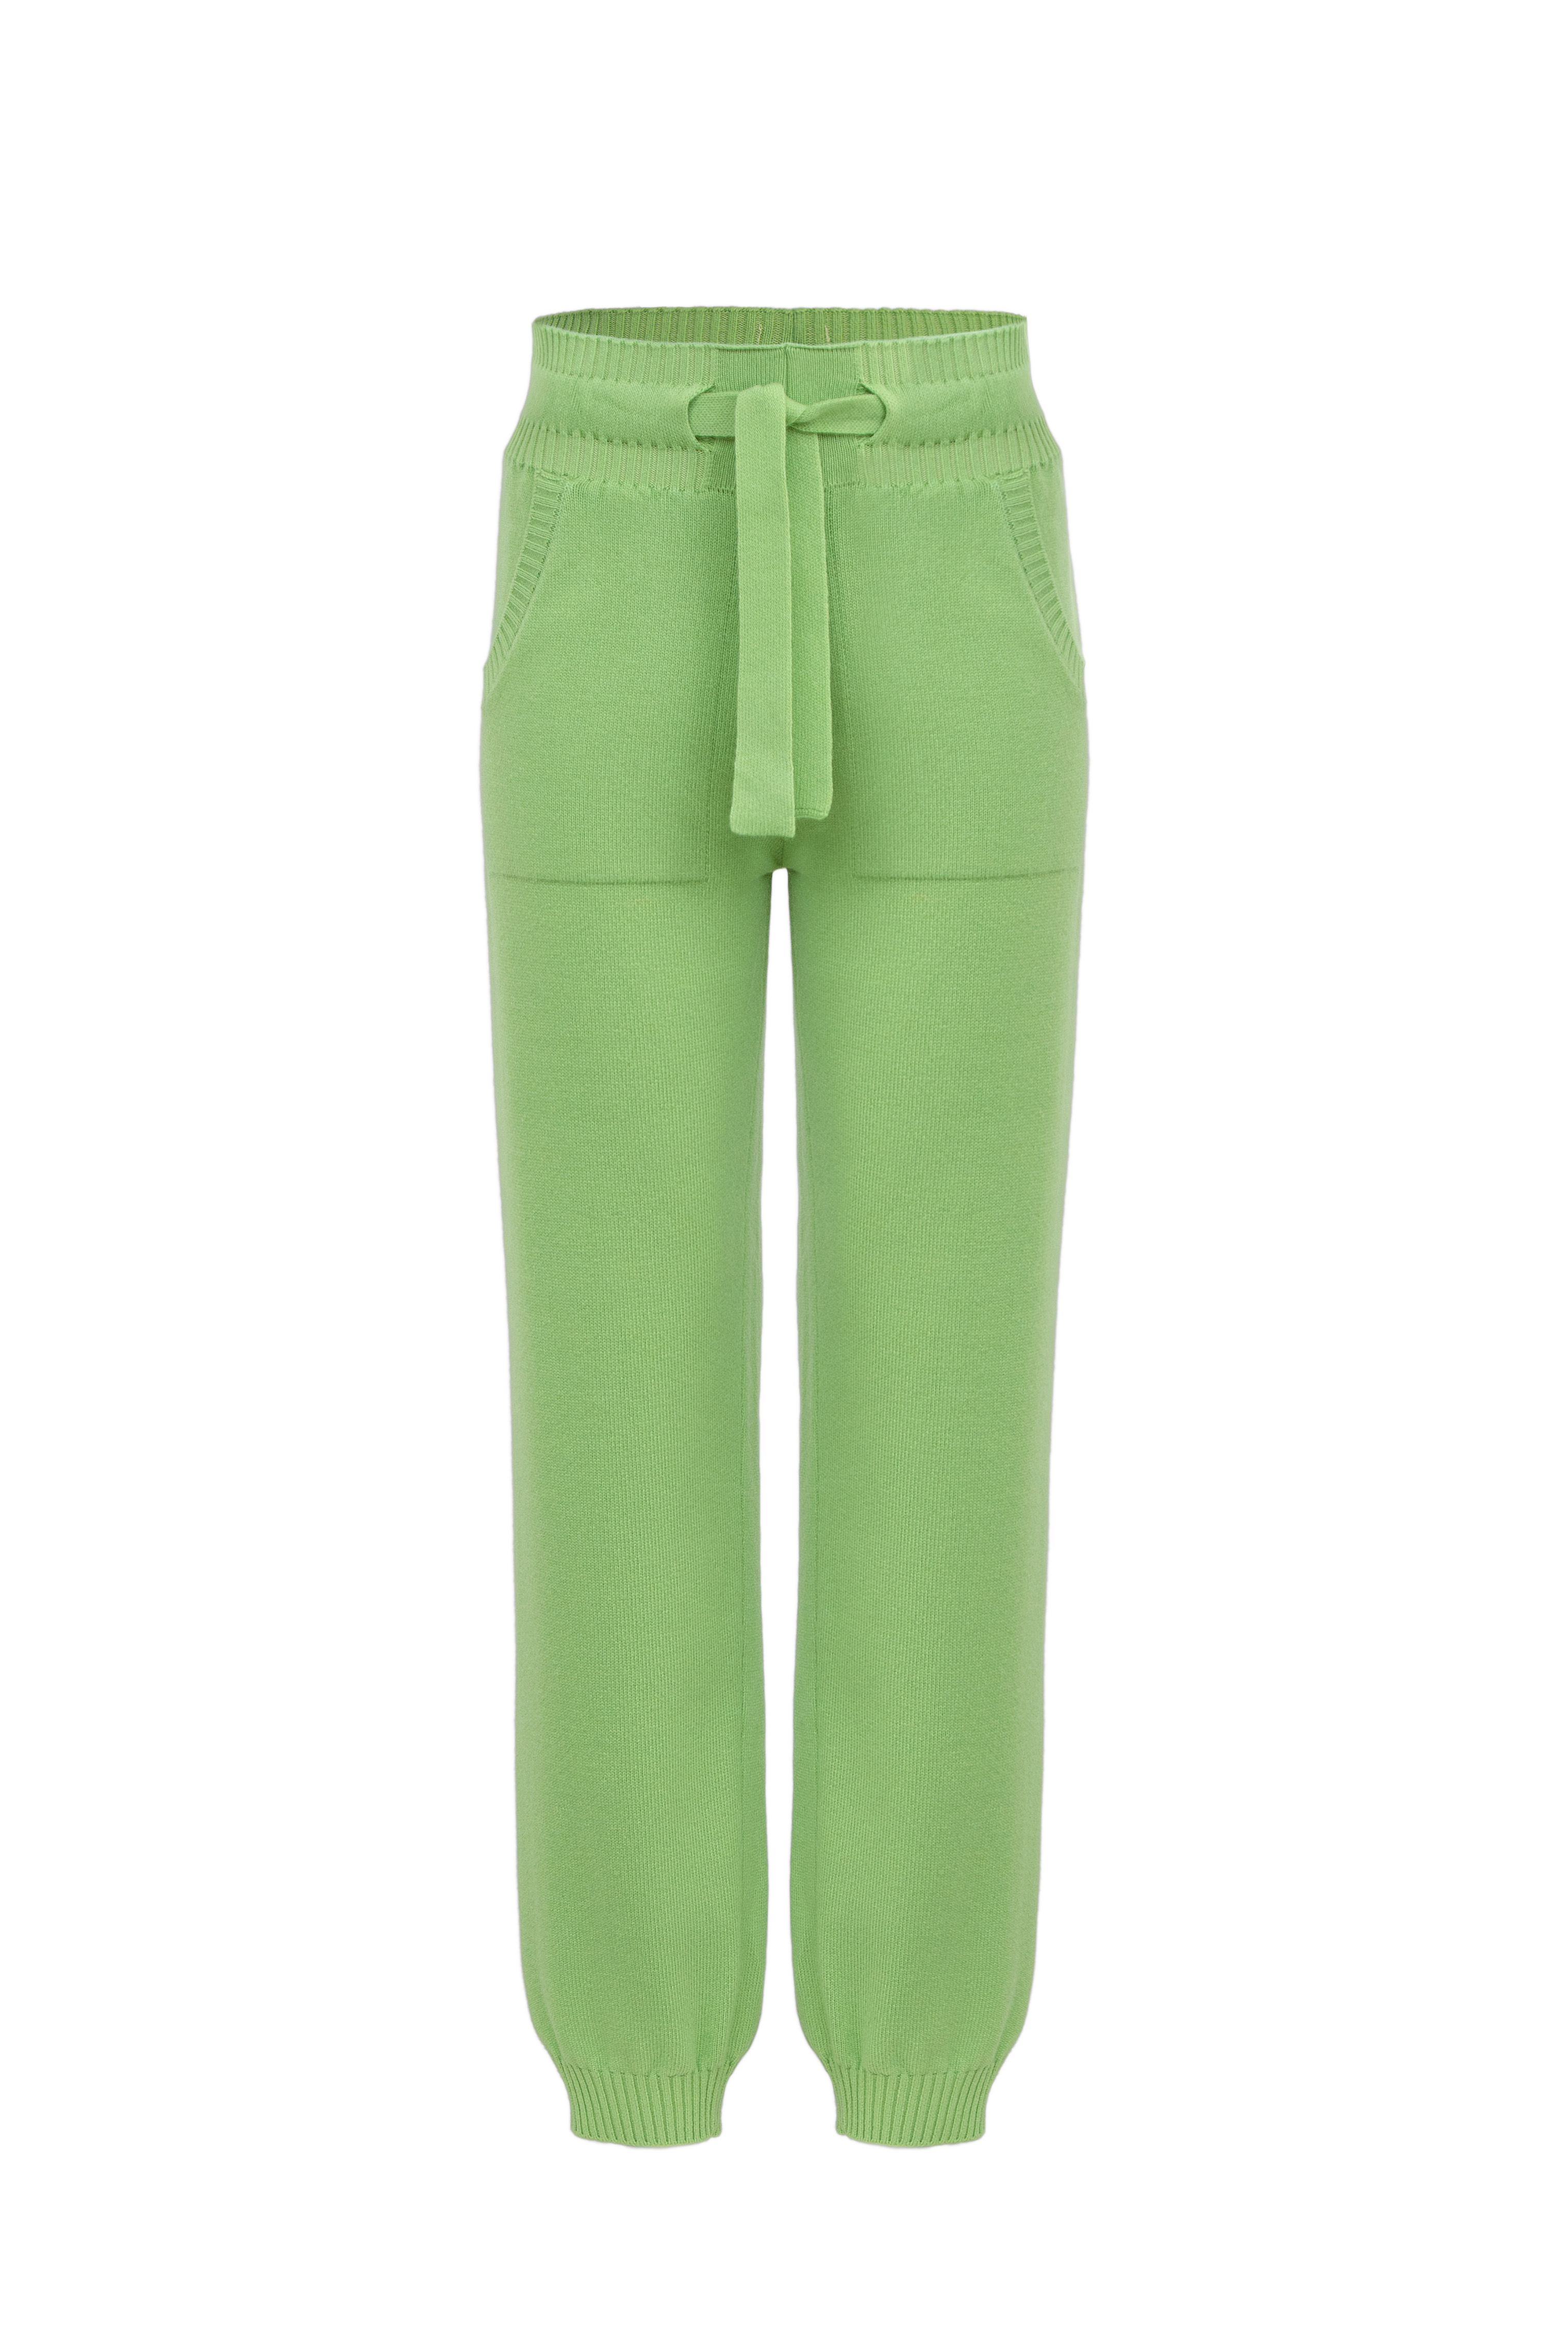 Trousers 3161-08 Green from BRUSNiKA